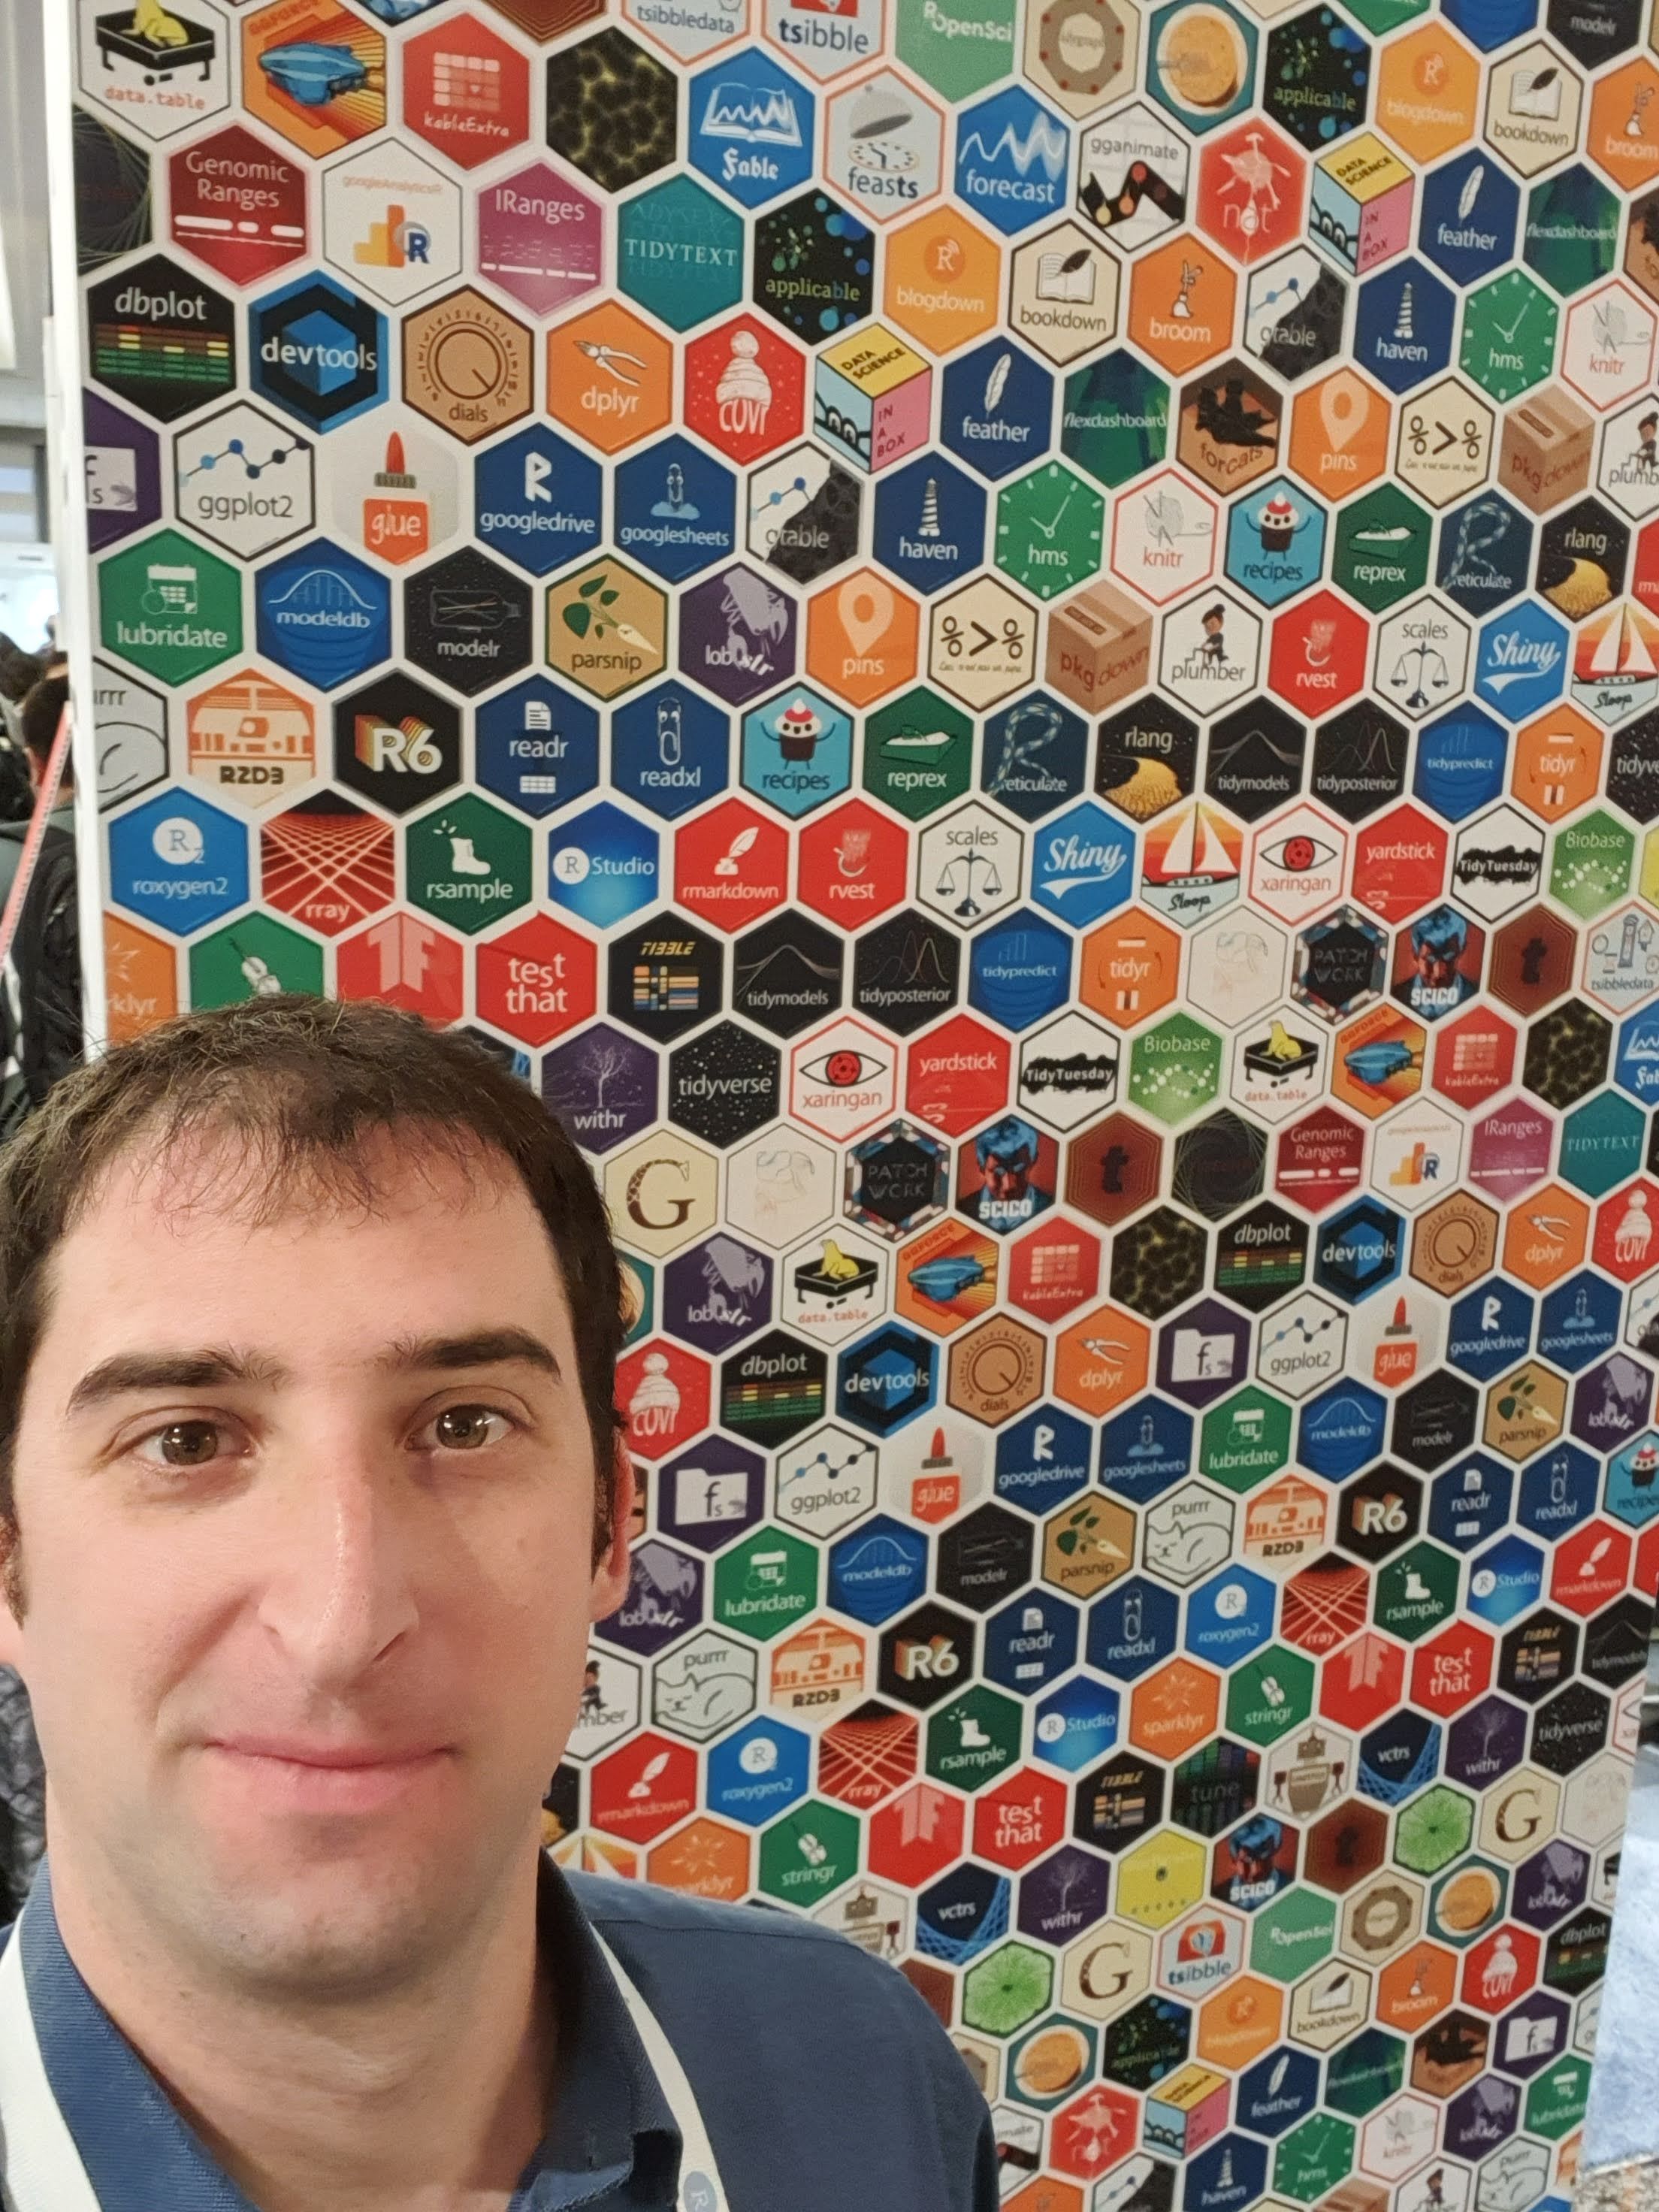 The hexawall at rstudio::conf2020